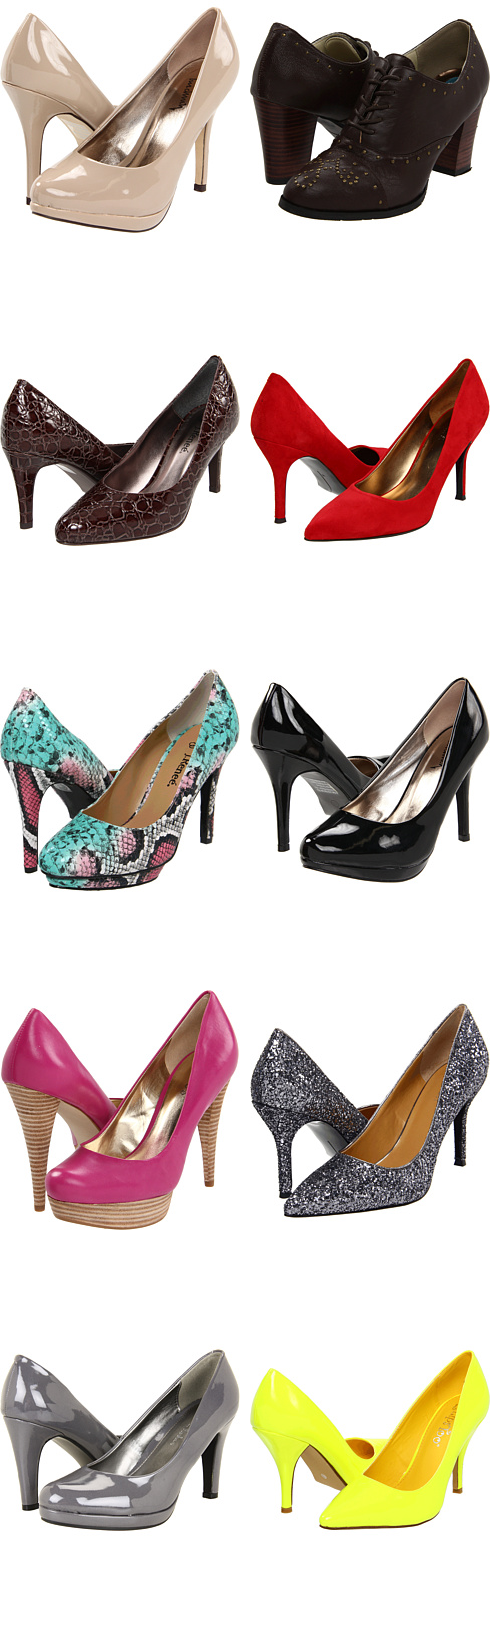 Cindy Lou by Luichiny, Tudor by Fitzwell, Carol by J. Renee, Flax by Nine West,